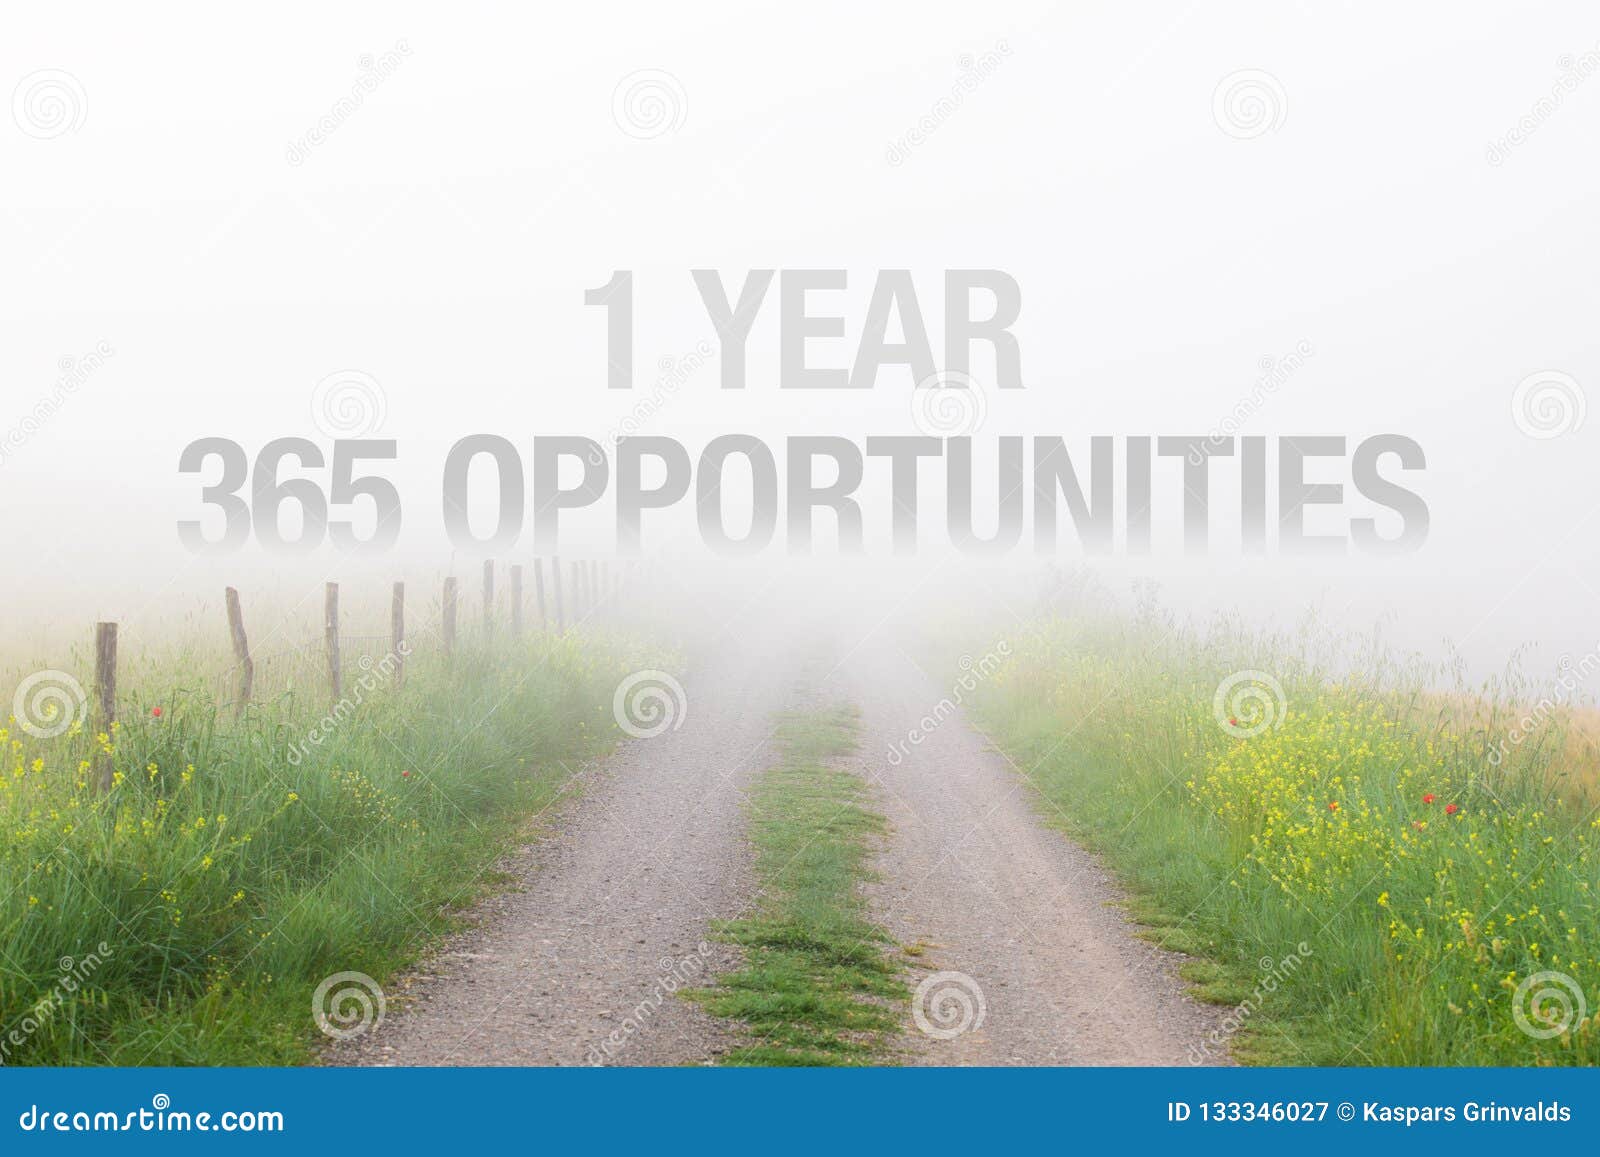 1 year equals 365 opportunities, inspirational quote for new years resolutions